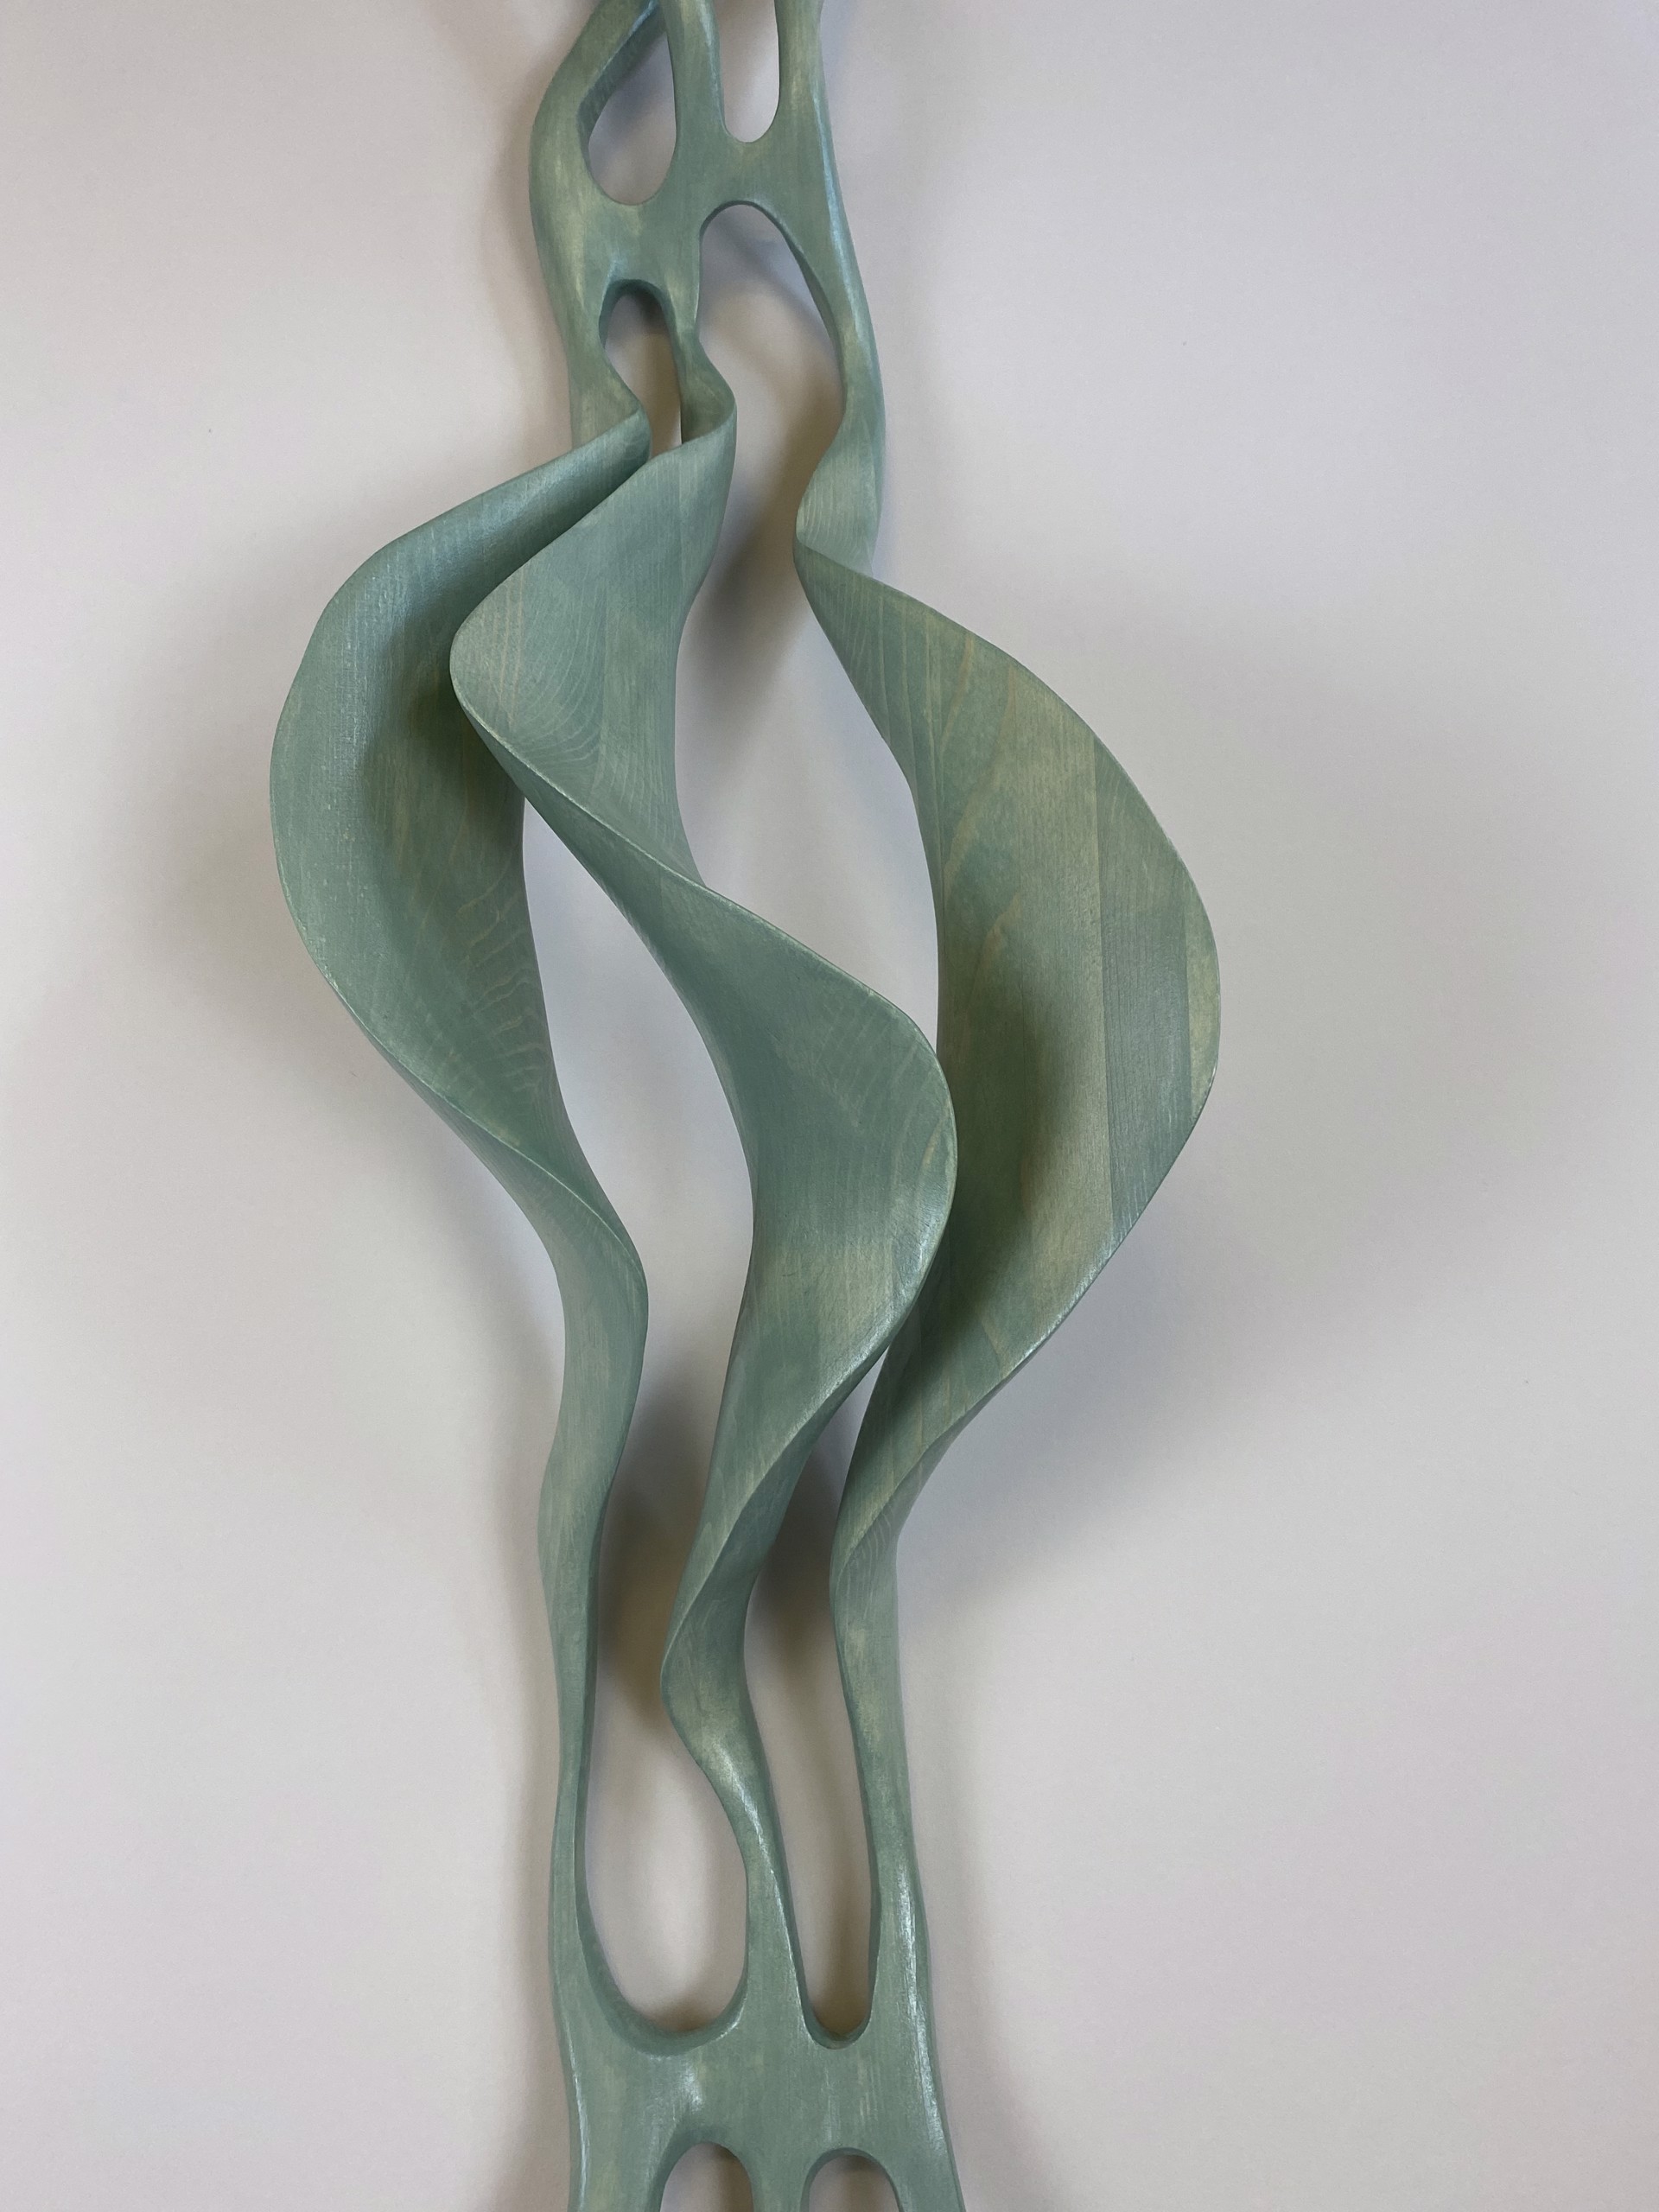 Turquoise Twist VII by Caprice Pierucci